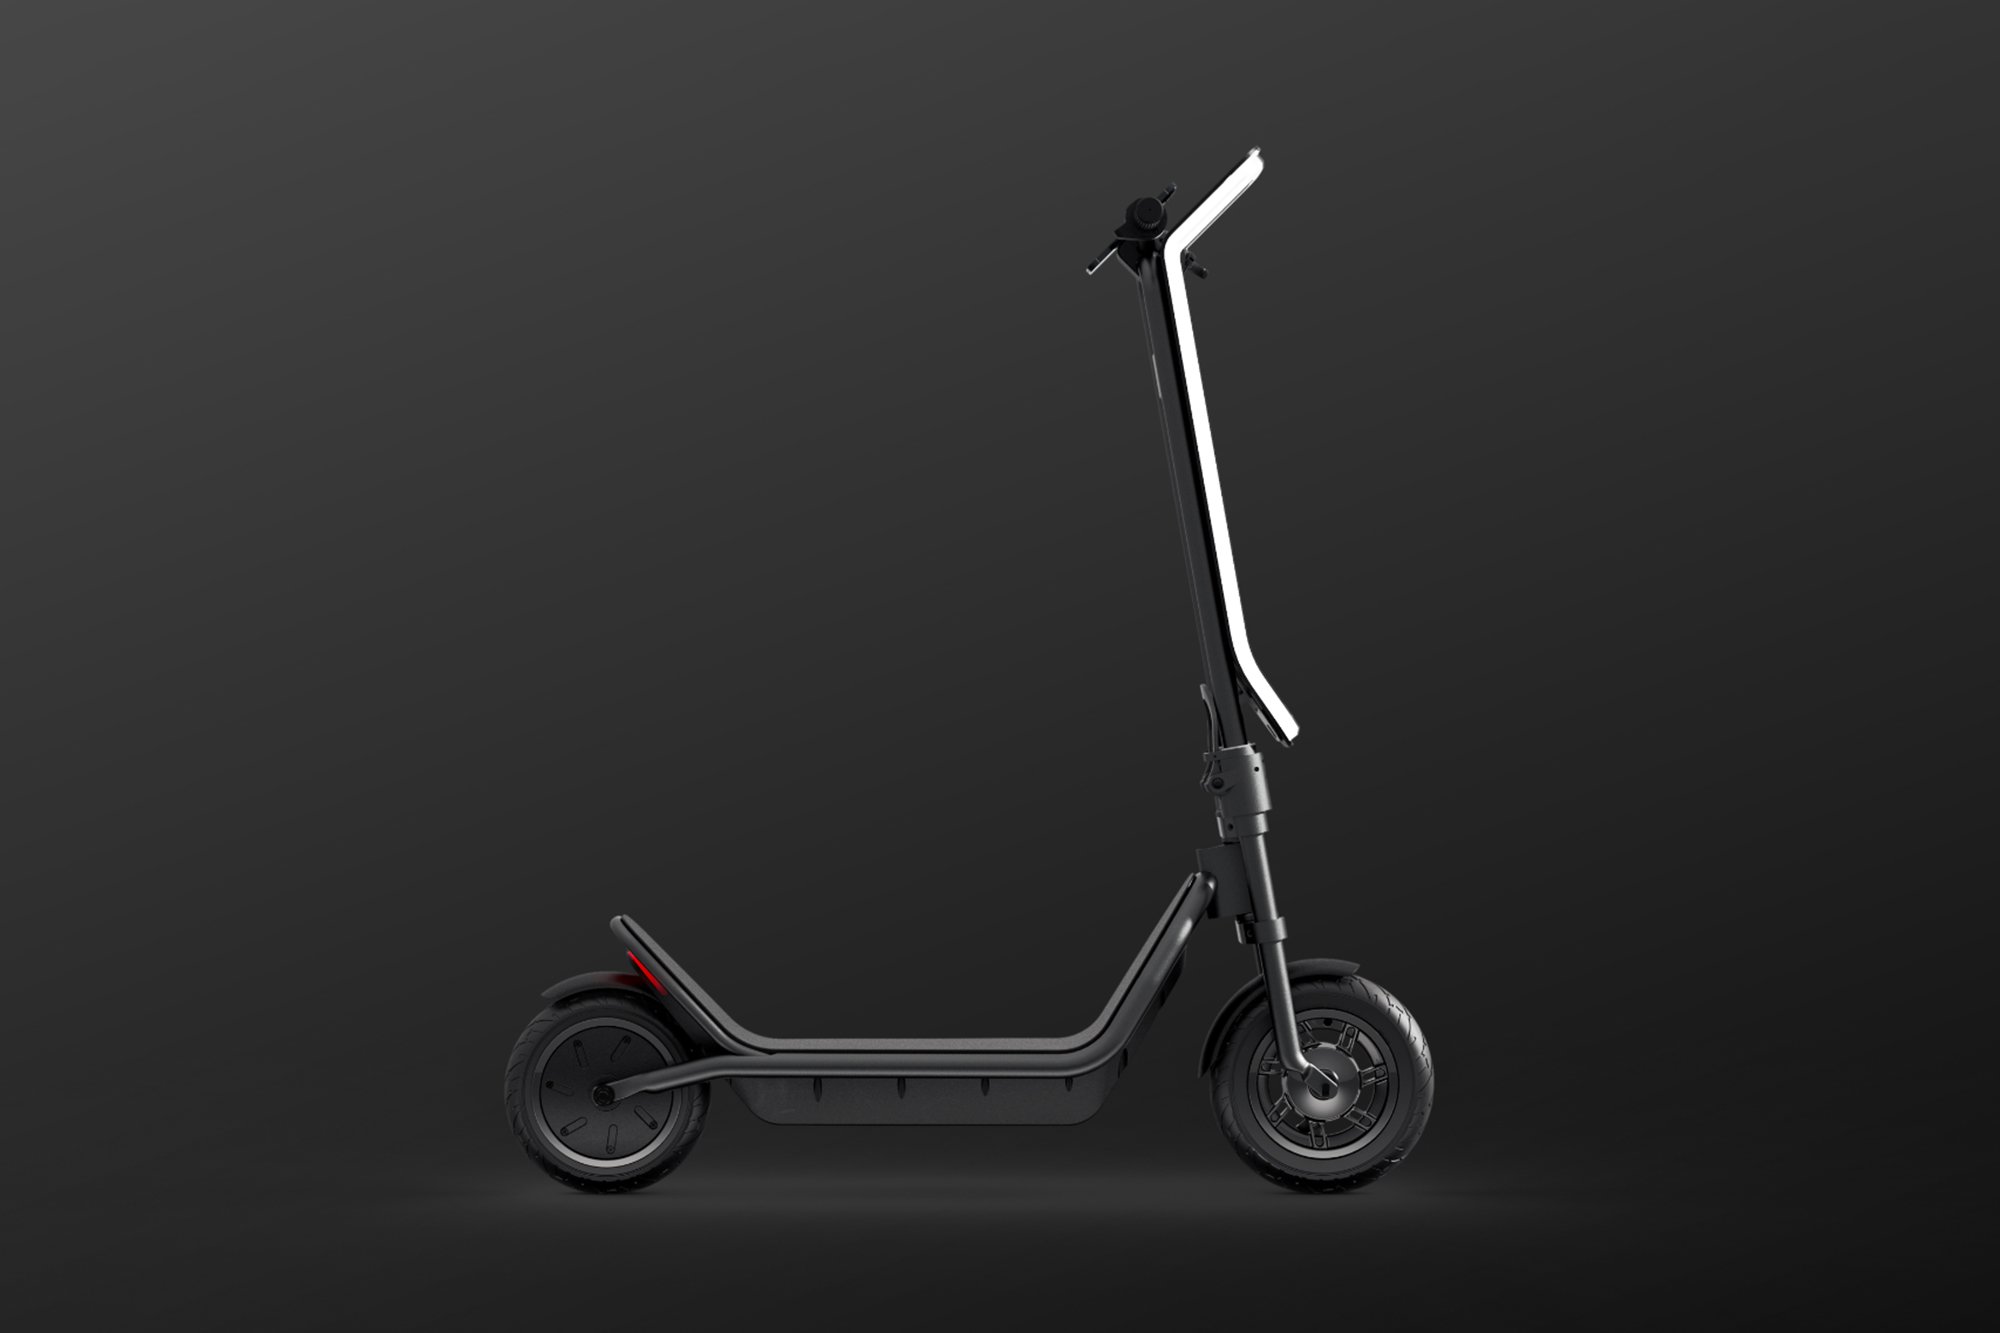 The minimal design Plume's electric scooter